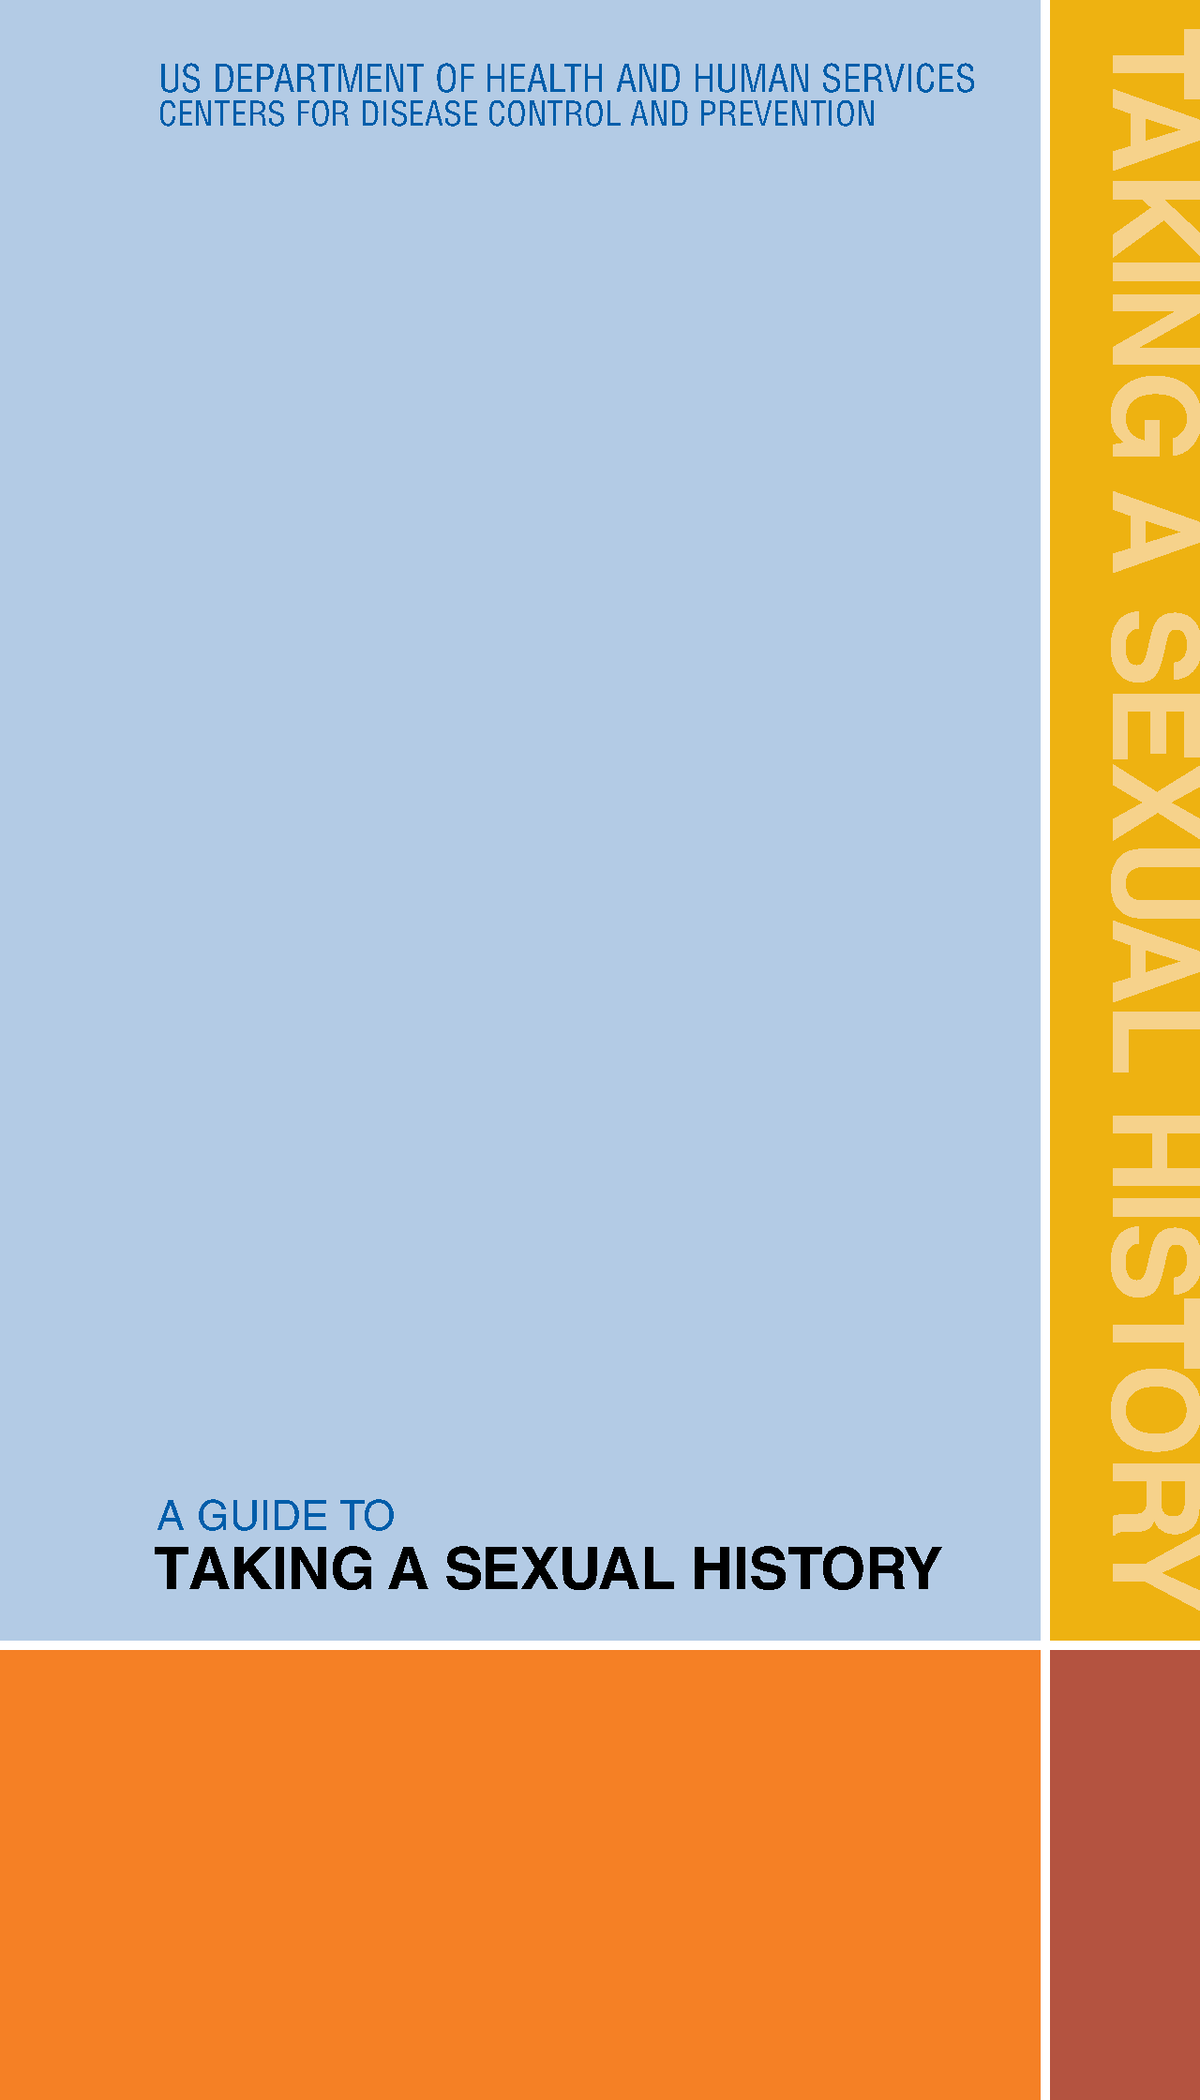 Nsg 170 Module 3 Sexual History Us Department Of Health And Human Servicescenters For Disease